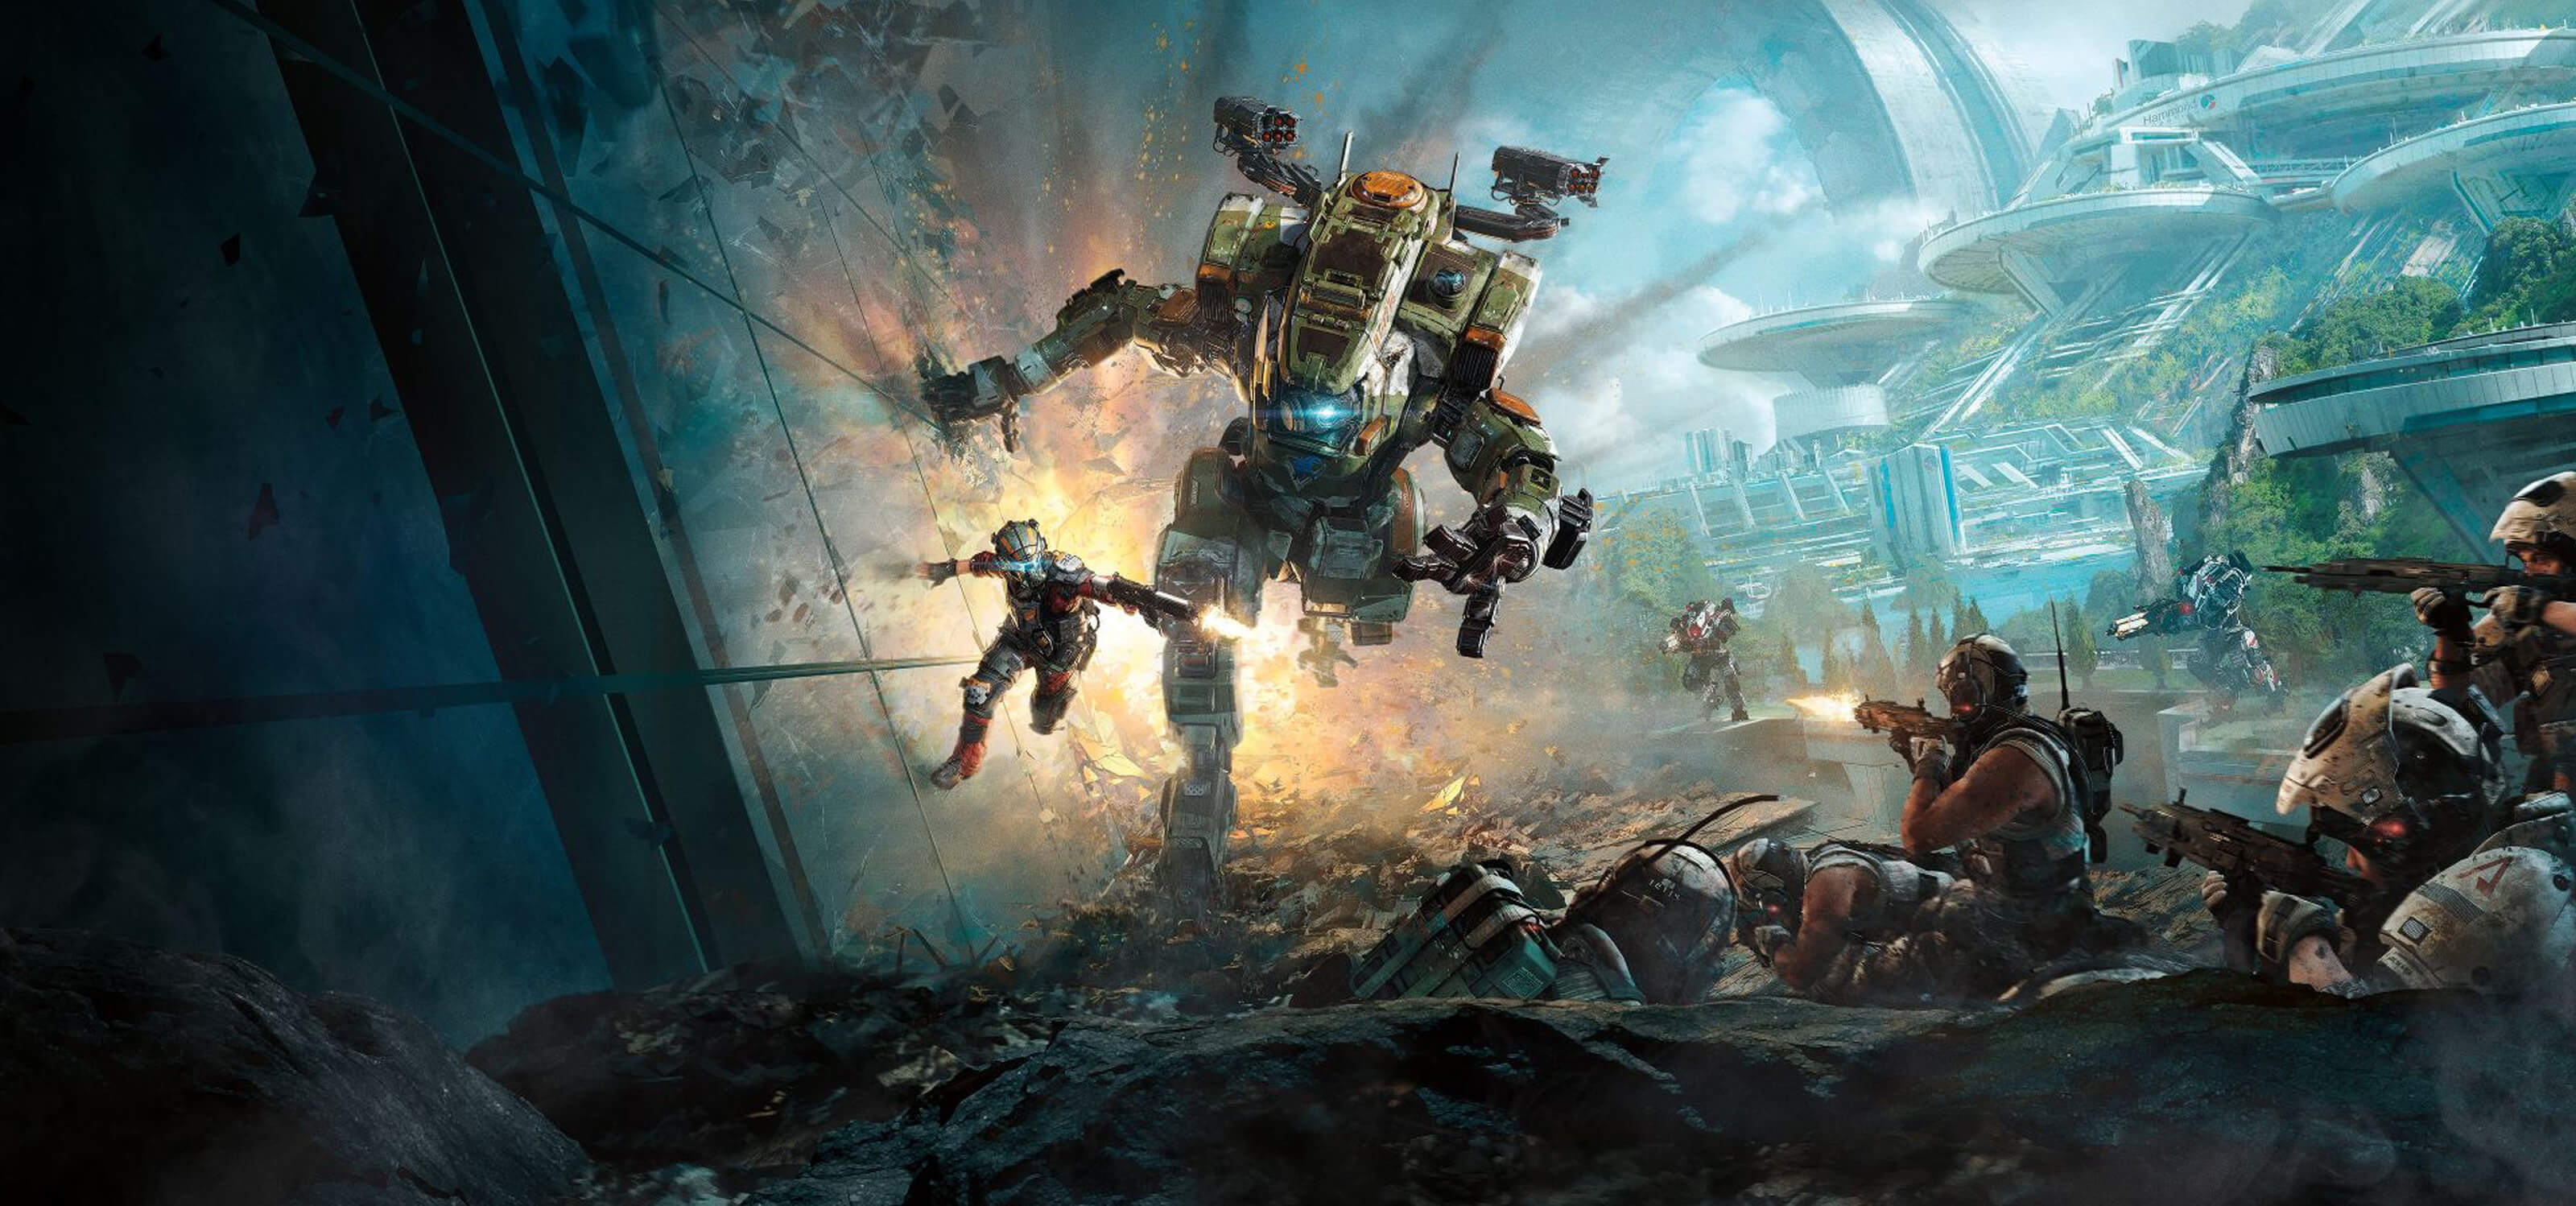 Screenshot from Titanfall 2 of a Titan, a huge robot-like exoskeleton containing a pilot, chasing a man in a futuristic city